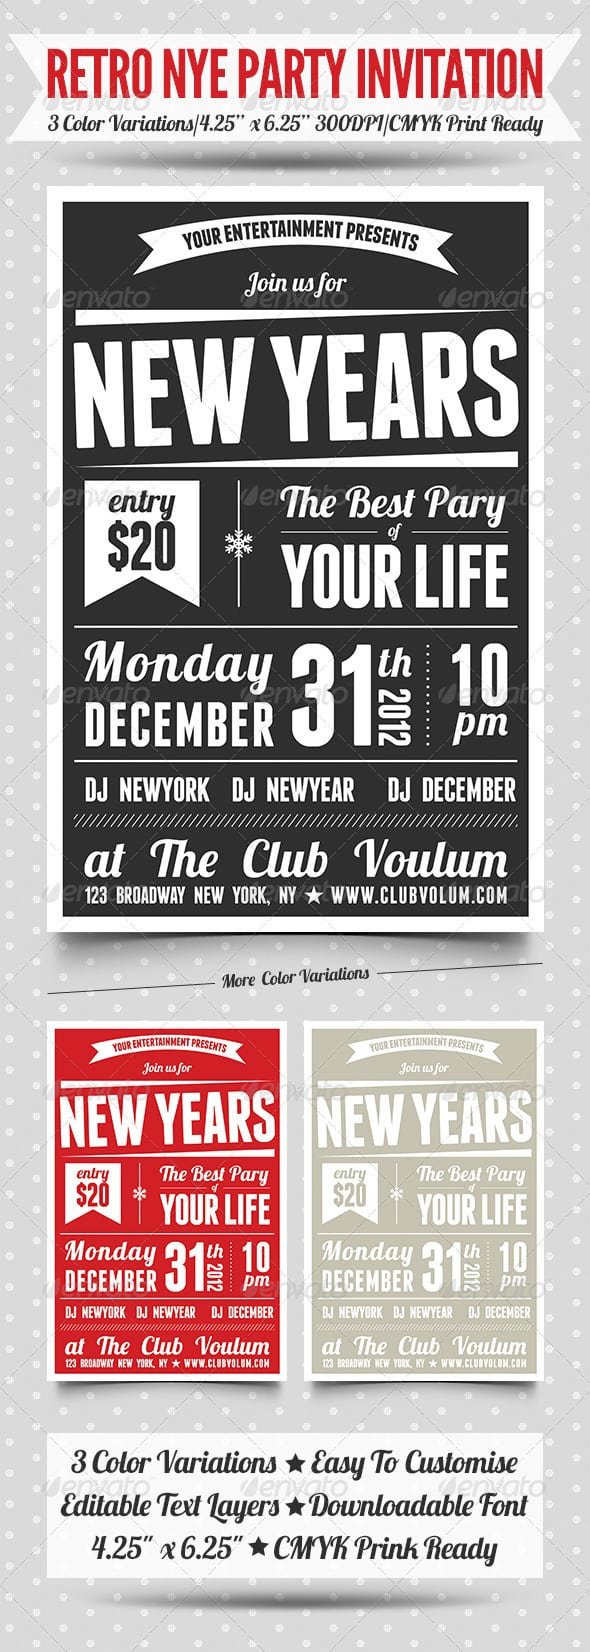 Doc    New Years Eve Party Invitation Templates â 28 New Year